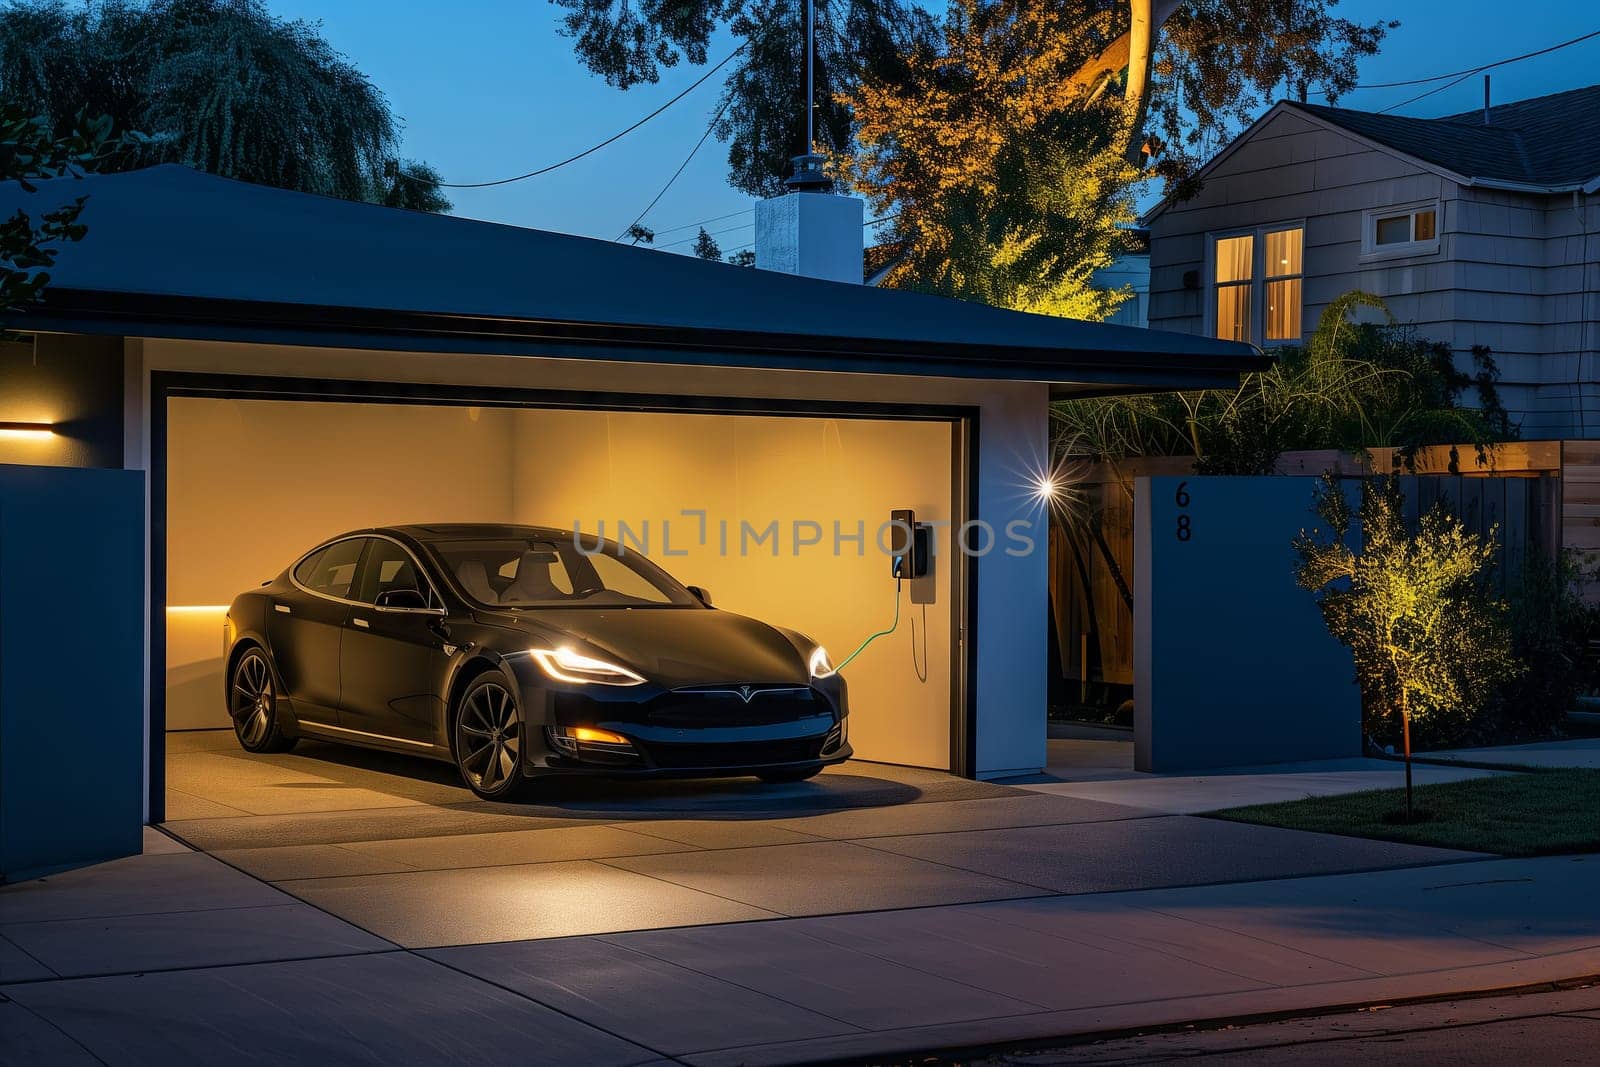 A Tesla Model S with its wheels securely parked in a garage at night, resting safely next to the buildings fixture and surrounded by other vehicles and automotive tires